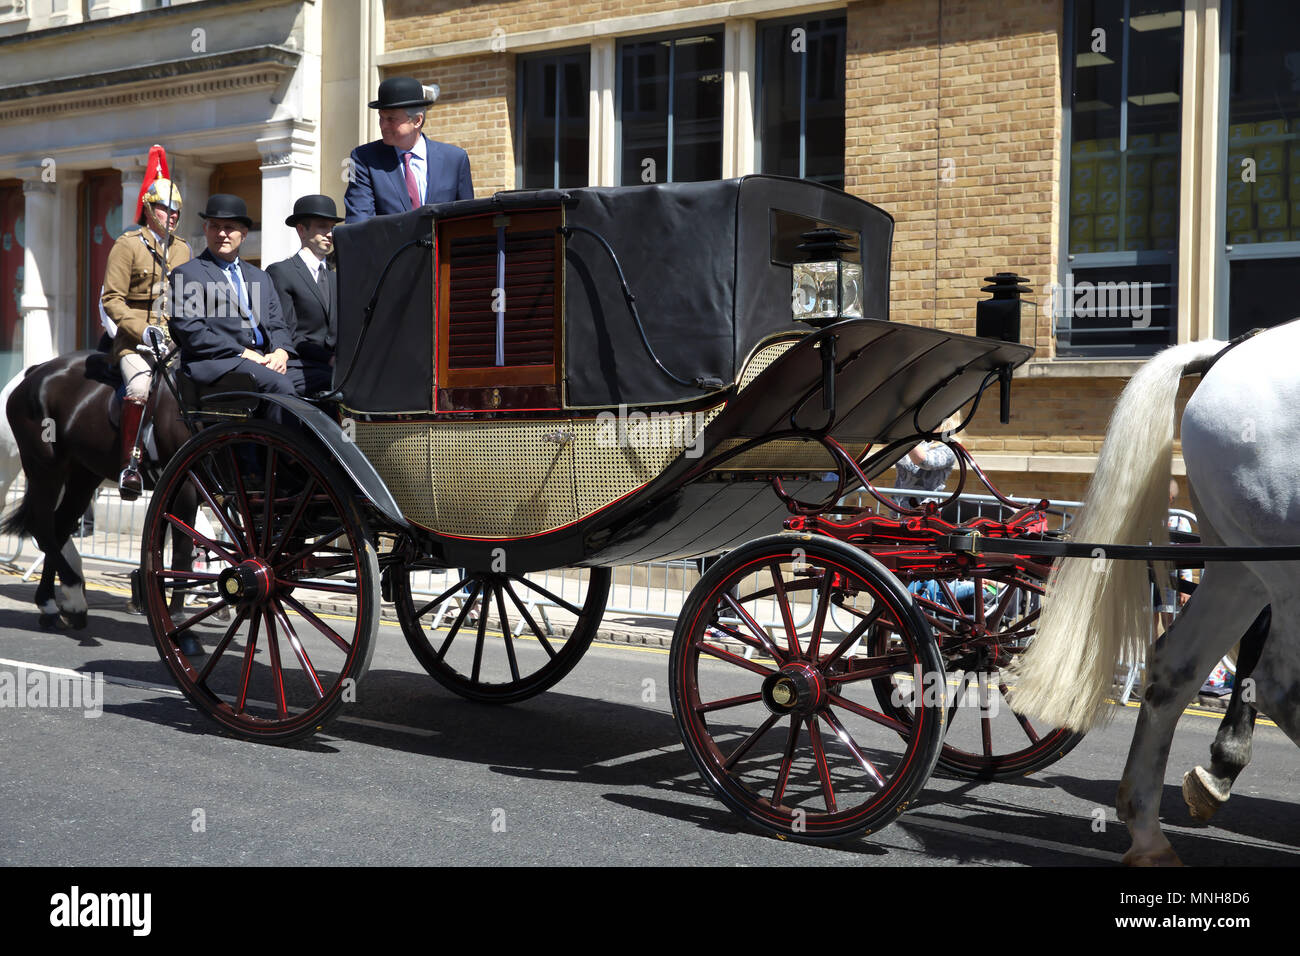 Windsor,UK,17th May 2018,The Royal Wedding Rehearsal in Windsor takes place ahead of the marriage on Saturday of Prince Harry to Meghan Markle. The Ascot Landau carriage left Windsor castle to Process around the Town. The carriage was surrounded by members of the Household Cavalry.Credit Keith Larby/Alamy Live News Stock Photo